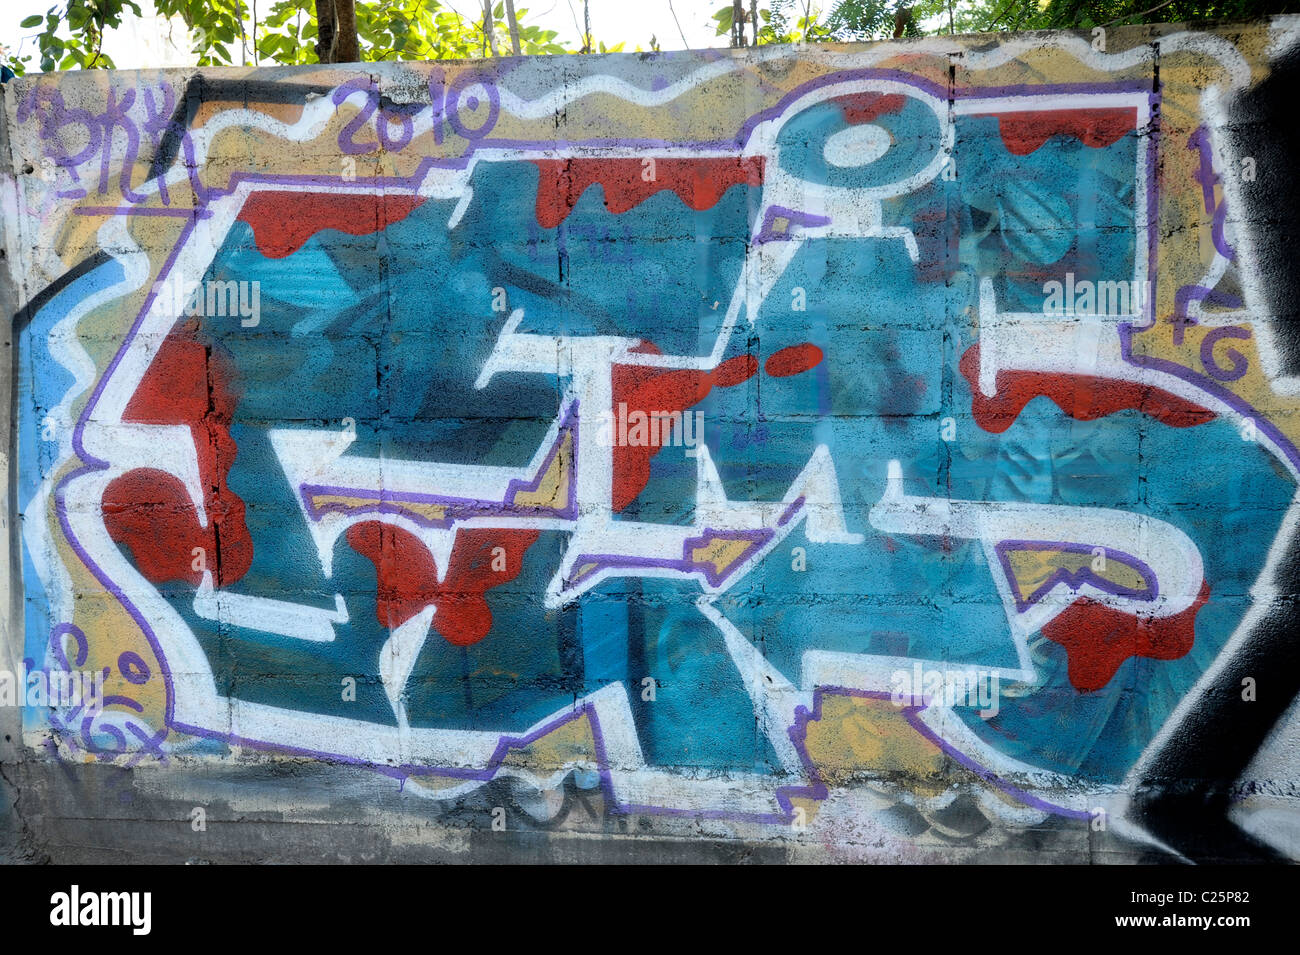 graffiti on the wall, expressionism and social messaging, weird and bizarre art, bangkok, thailand Stock Photo